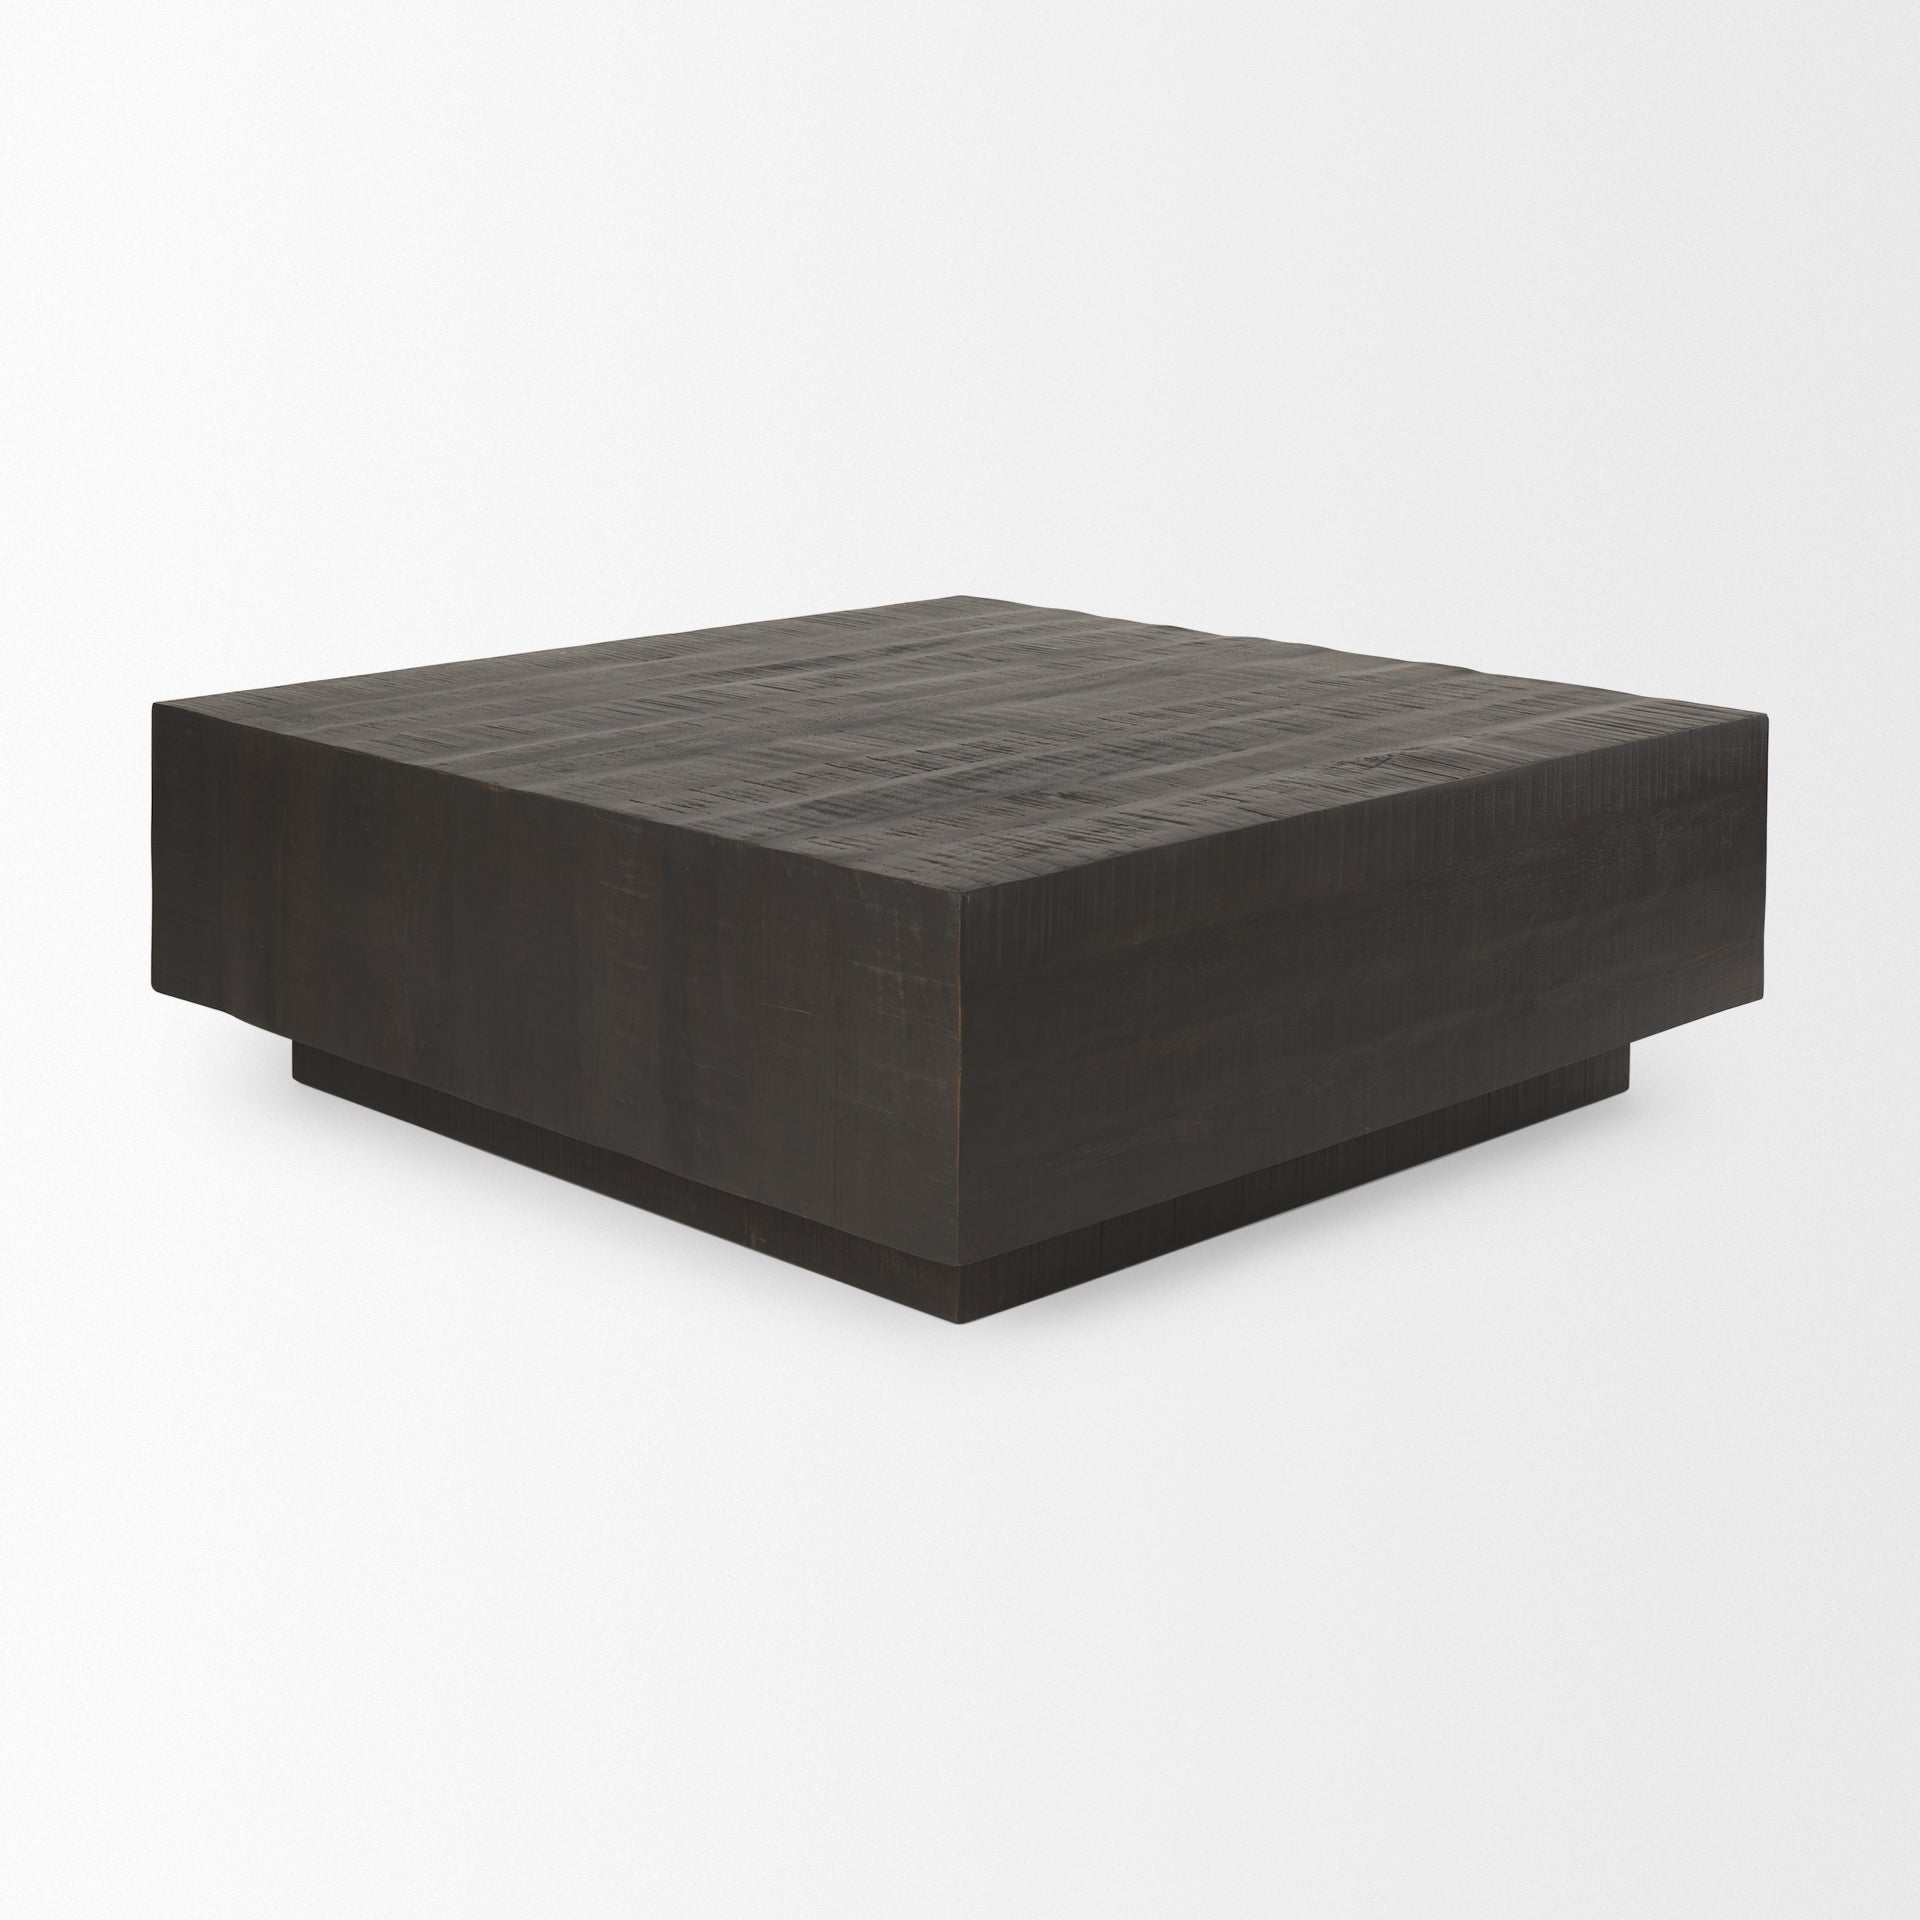 Hutton Square Coffee Table - Rug & Weave